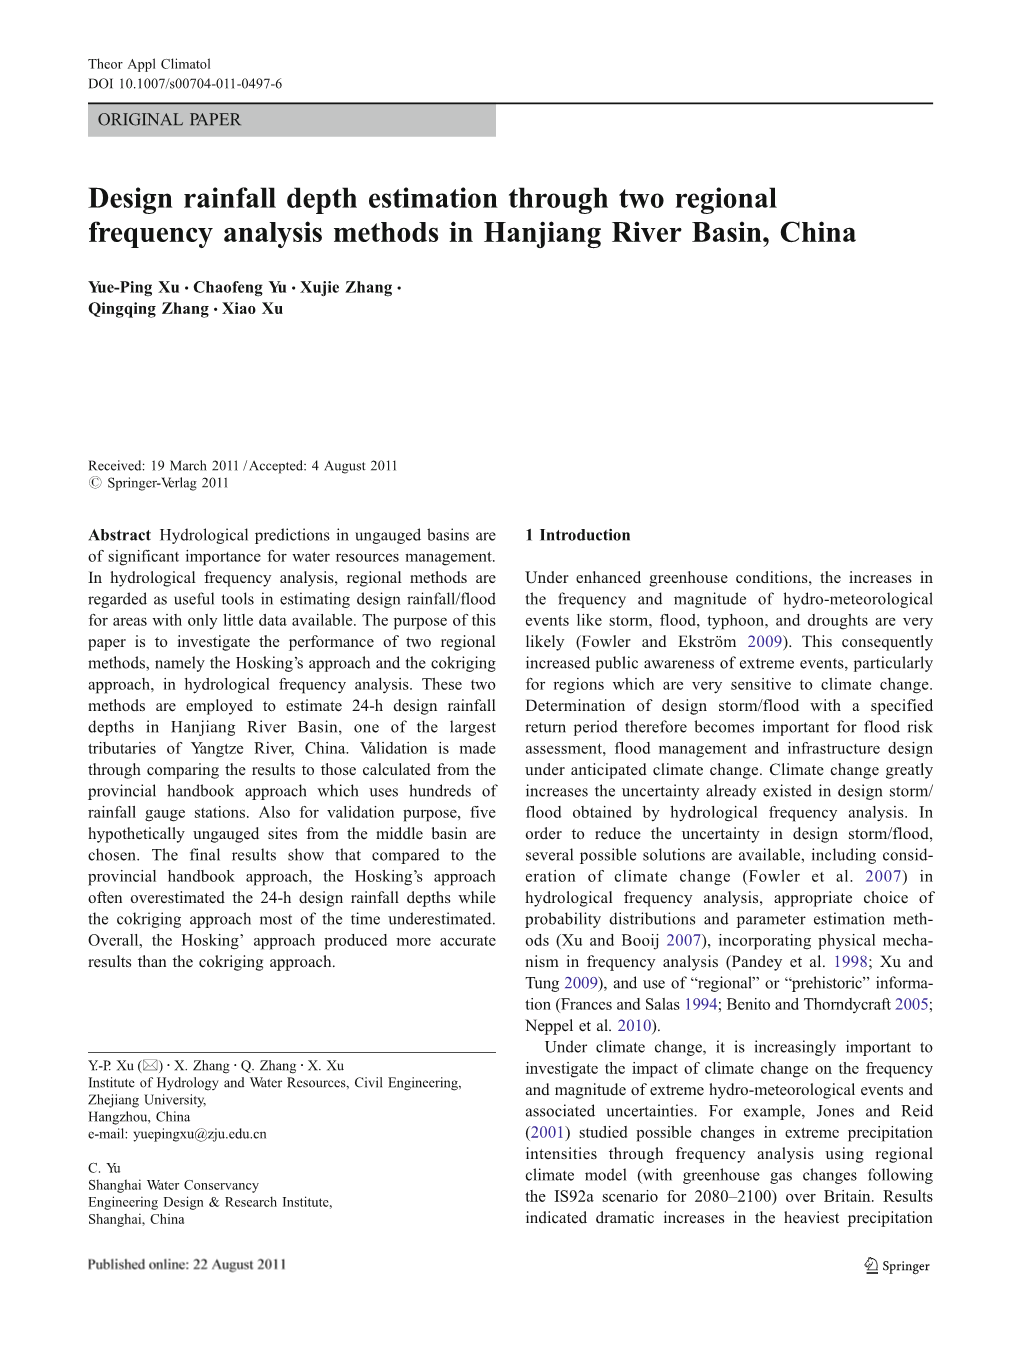 Design Rainfall Depth Estimation Through Two Regional Frequency Analysis Methods in Hanjiang River Basin, China